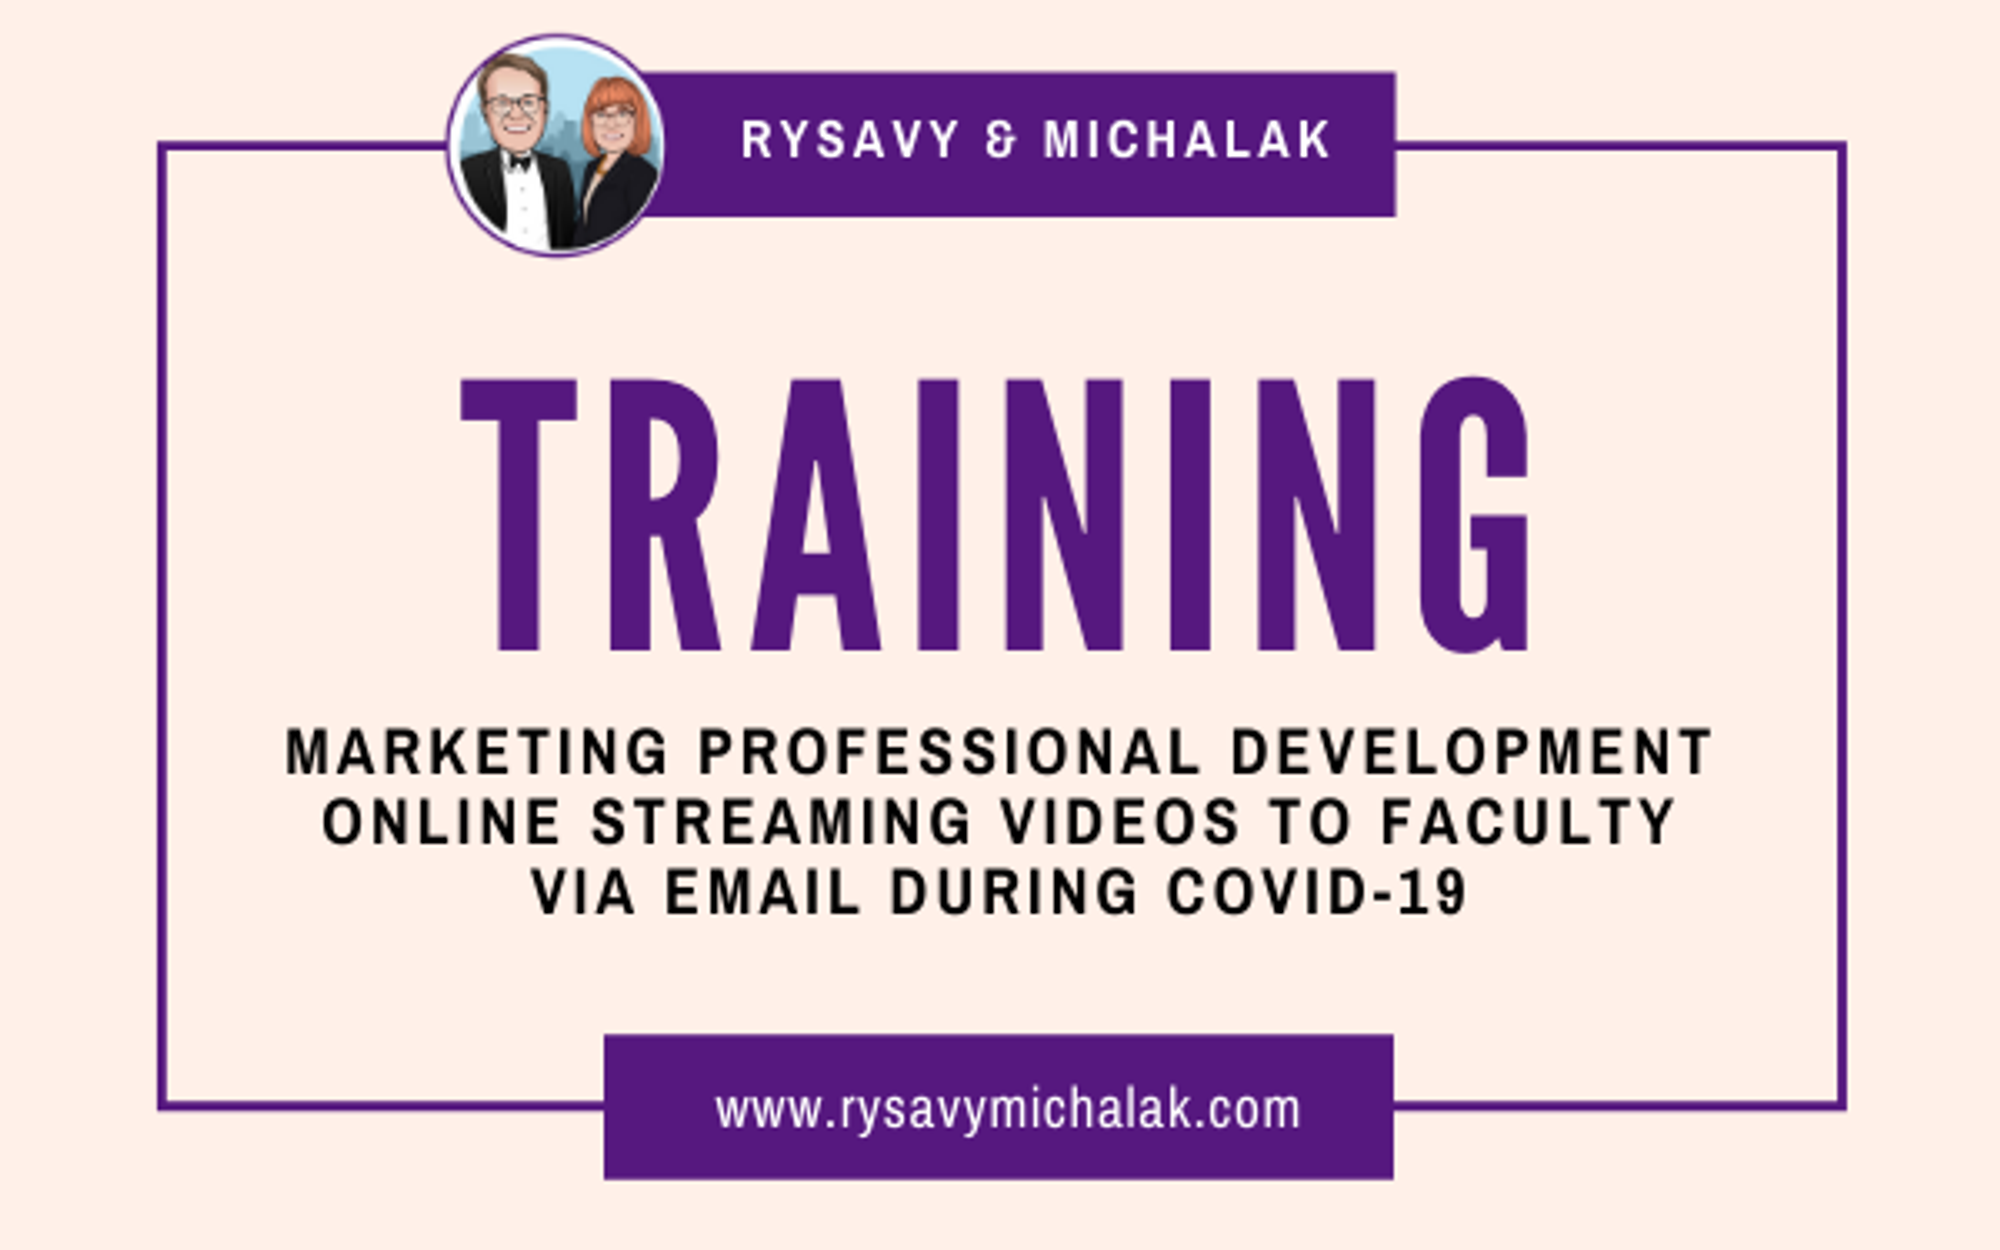 Marketing Professional Development Online Streaming Videos to Faculty via Email During COVID-19